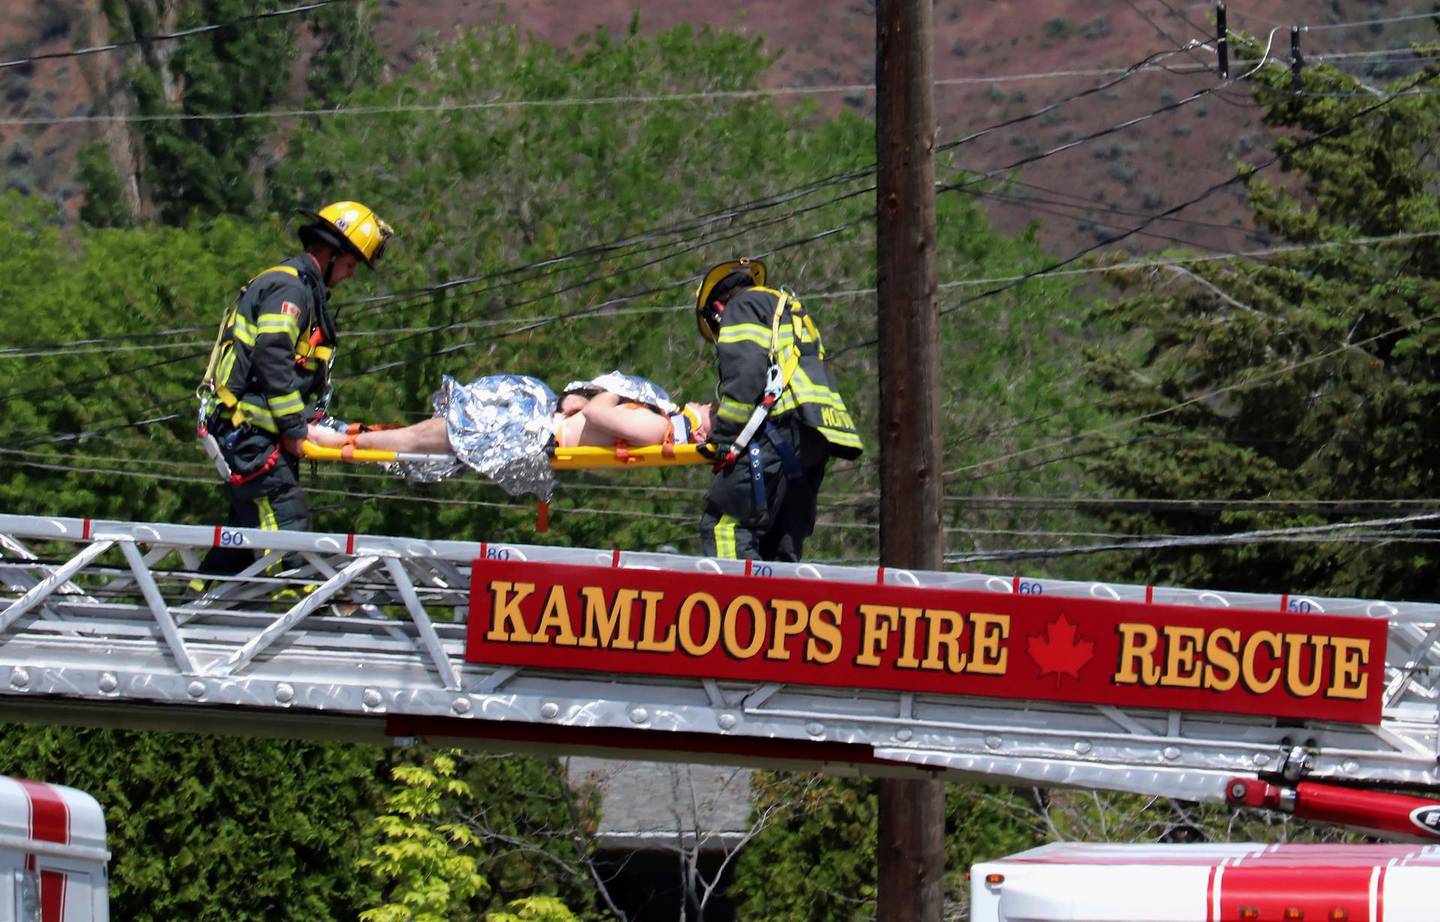 First responders carry an injured person on a stretcher across a fire truck ladder from a rooftop at the scene of a crash involving a Canadian Forces Snowbirds aircraft in Kamloops, British Columbia, Sunday, May 17, 2020. (Brendan Kergin/Castanet Kamloops/The Canadian Press via AP)